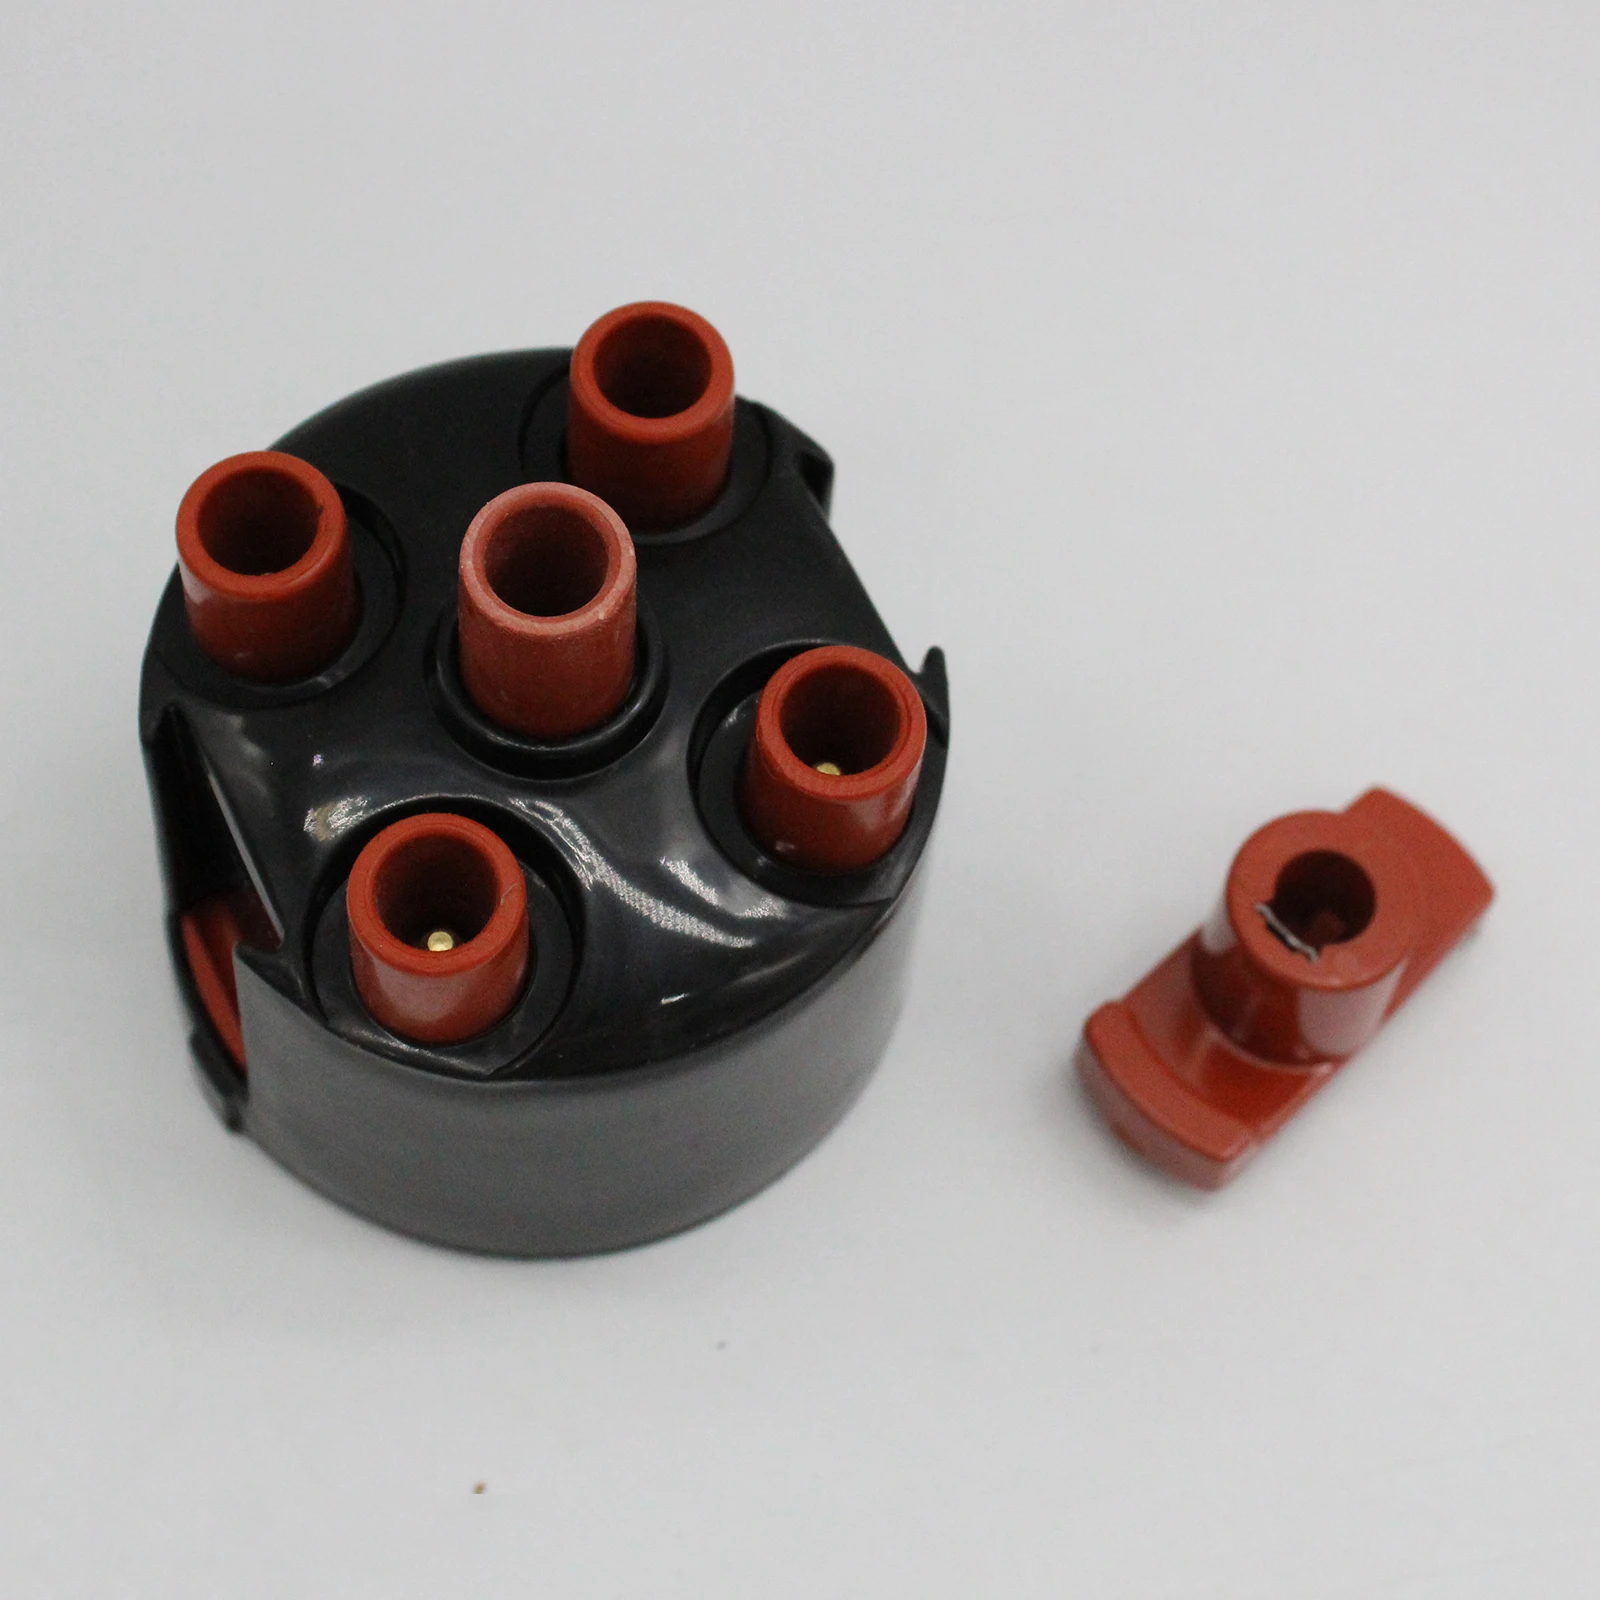 Auto Ignition Distributor Cap Rotor Kits 8cm Fit for Golf